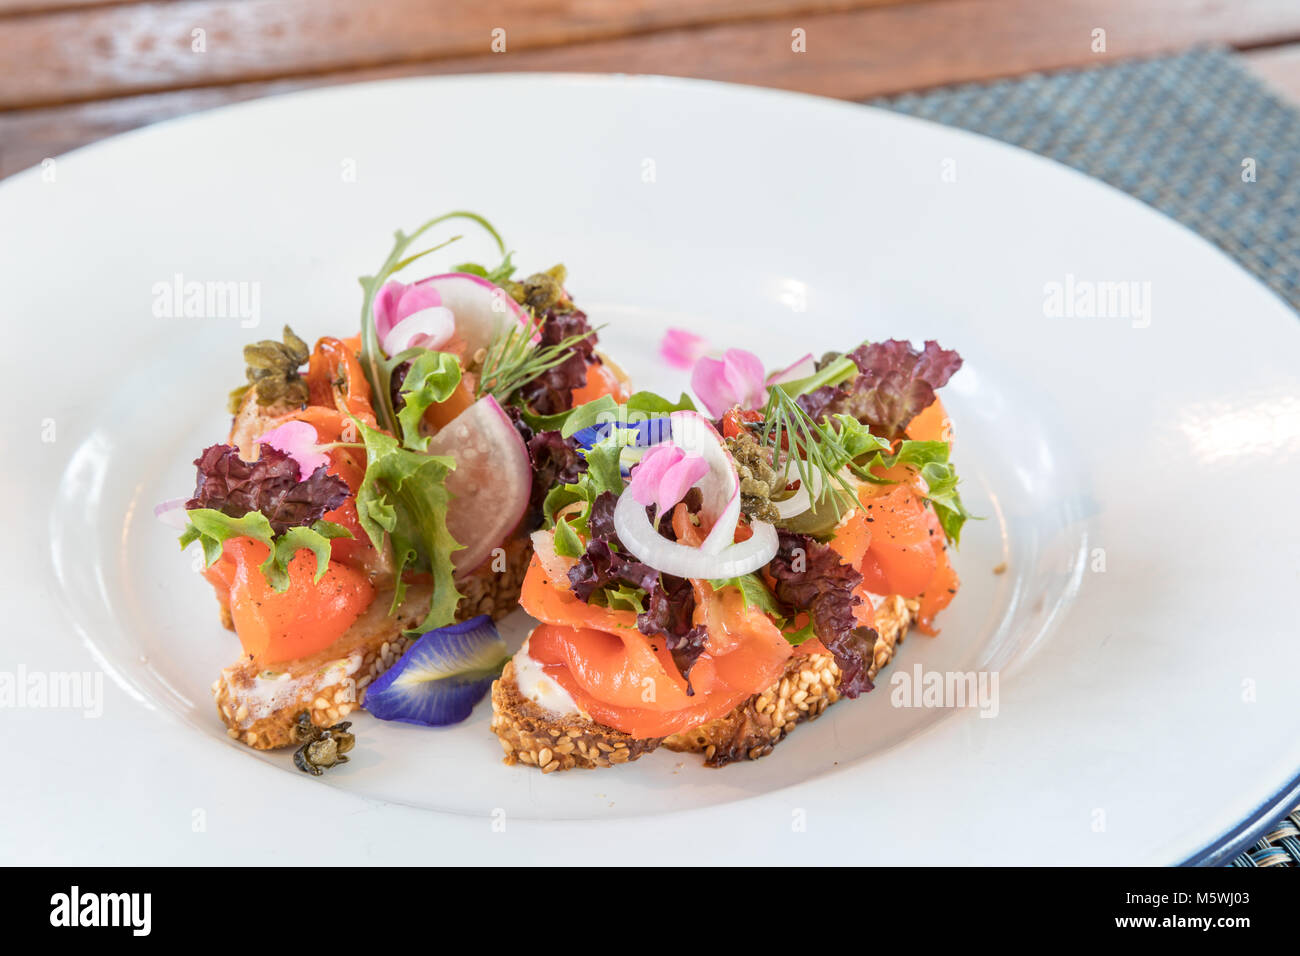 Canapes with smoked salmon and vegetable Stock Photo